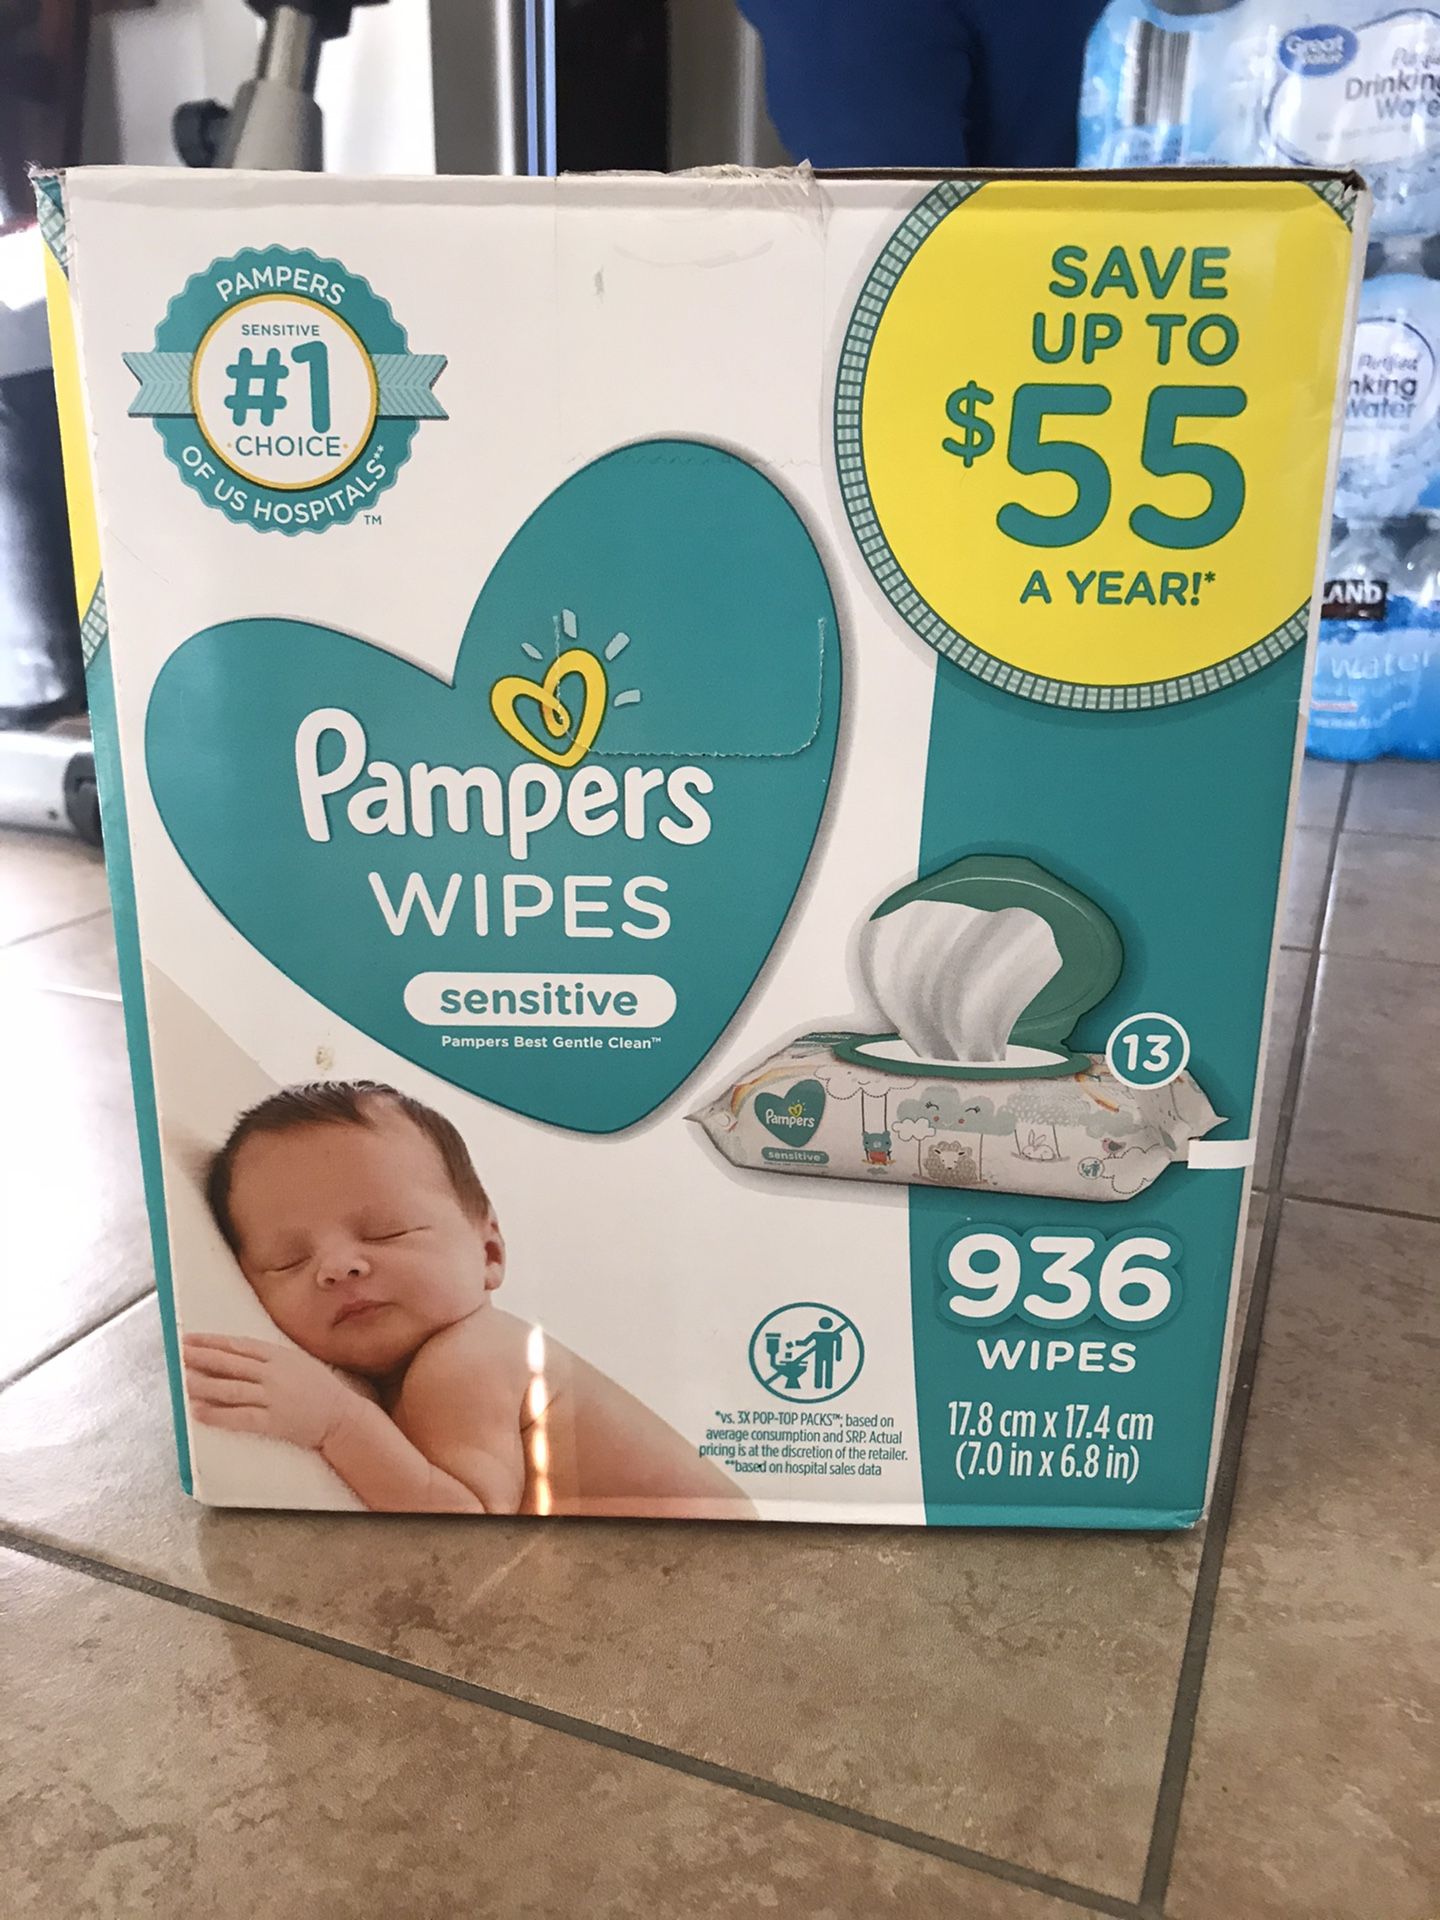 Pampers wipes 936 wipes